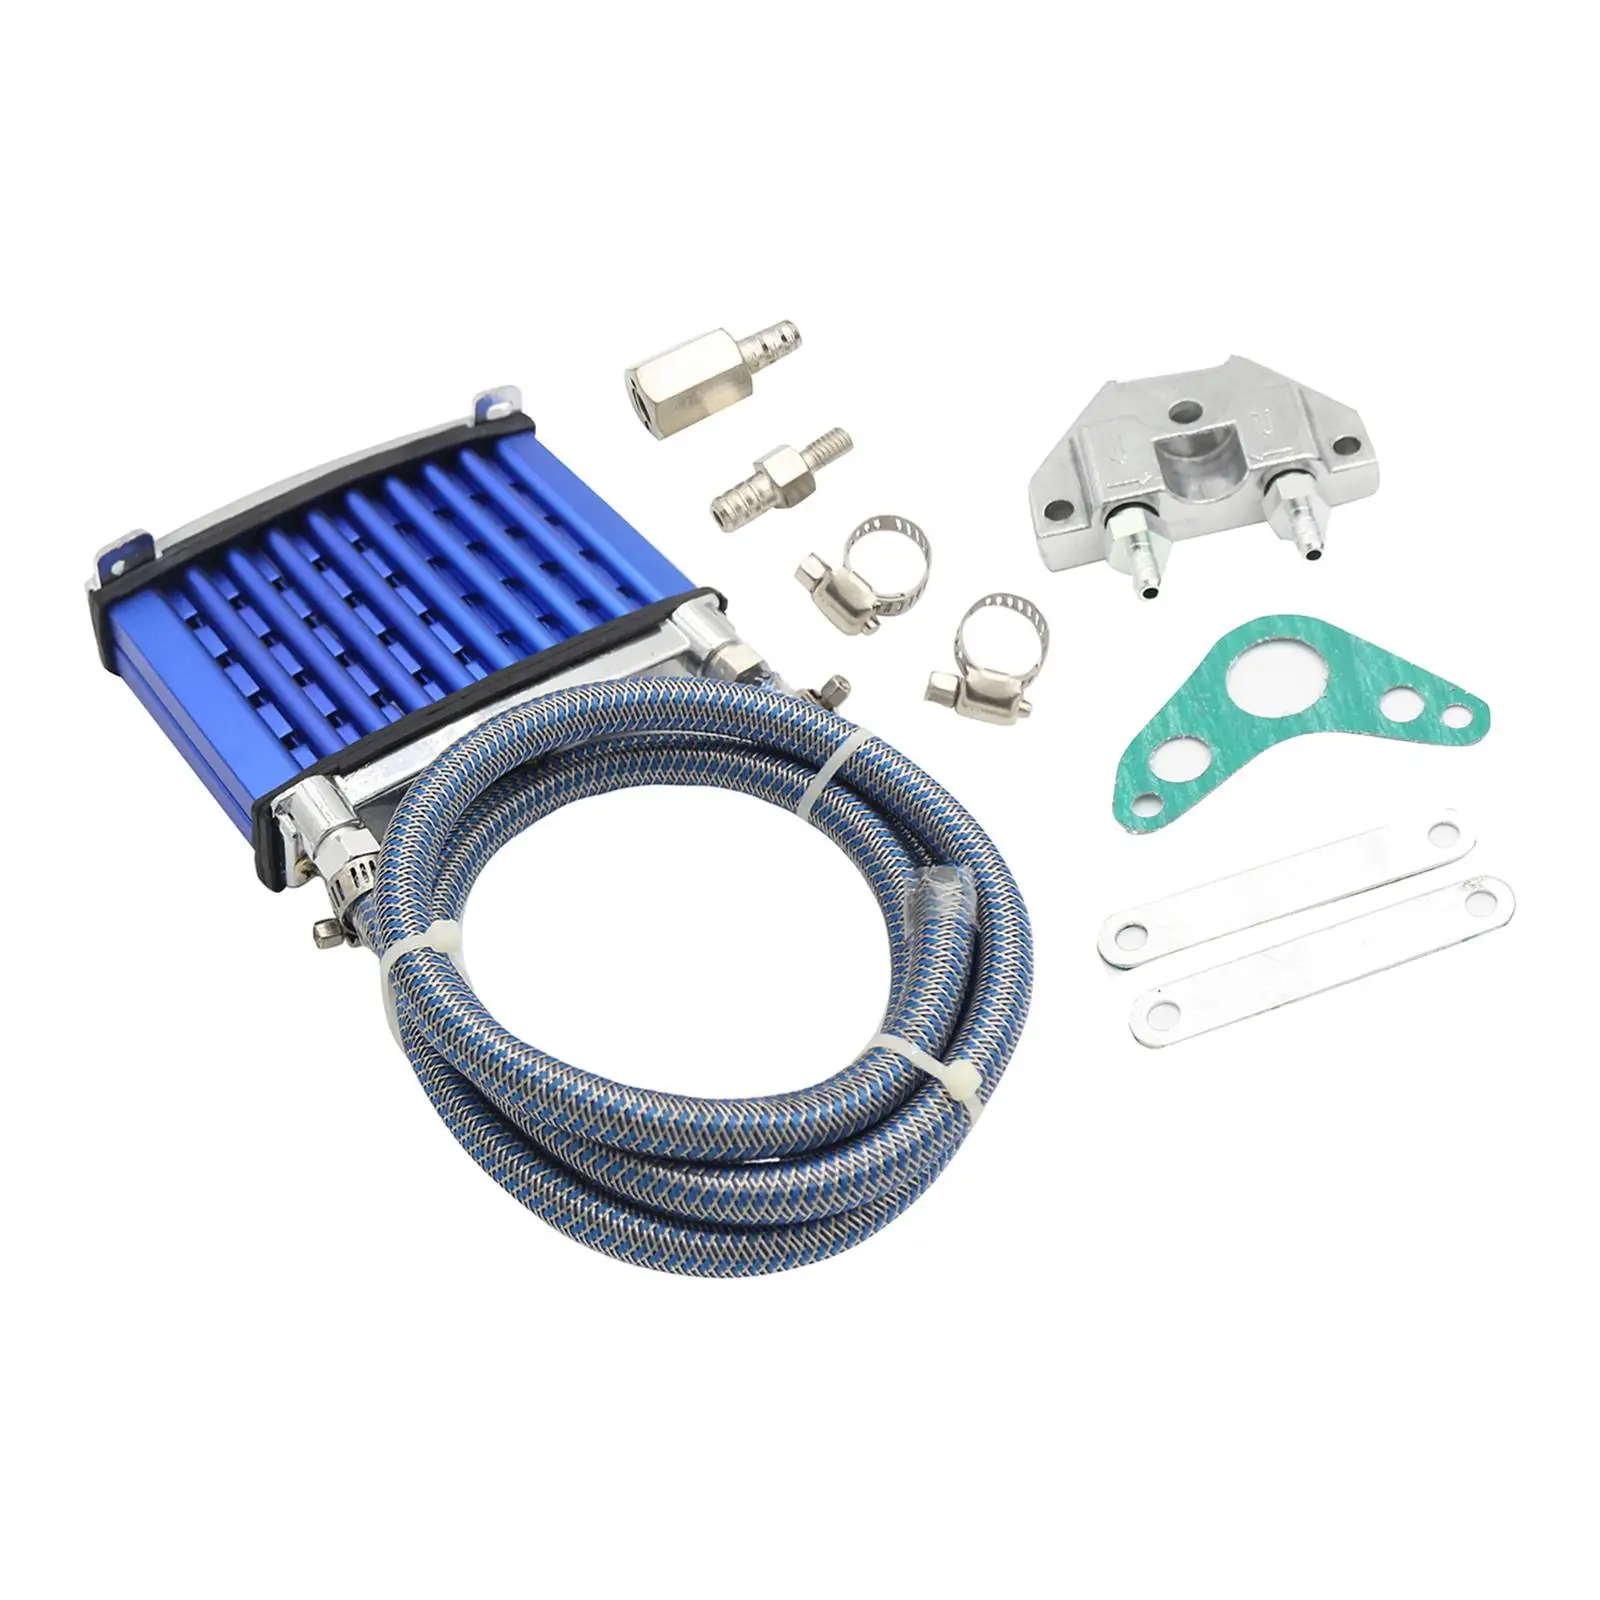 Motorcycle Oil Cooler Radiator System Universal for  1250cc 150cc